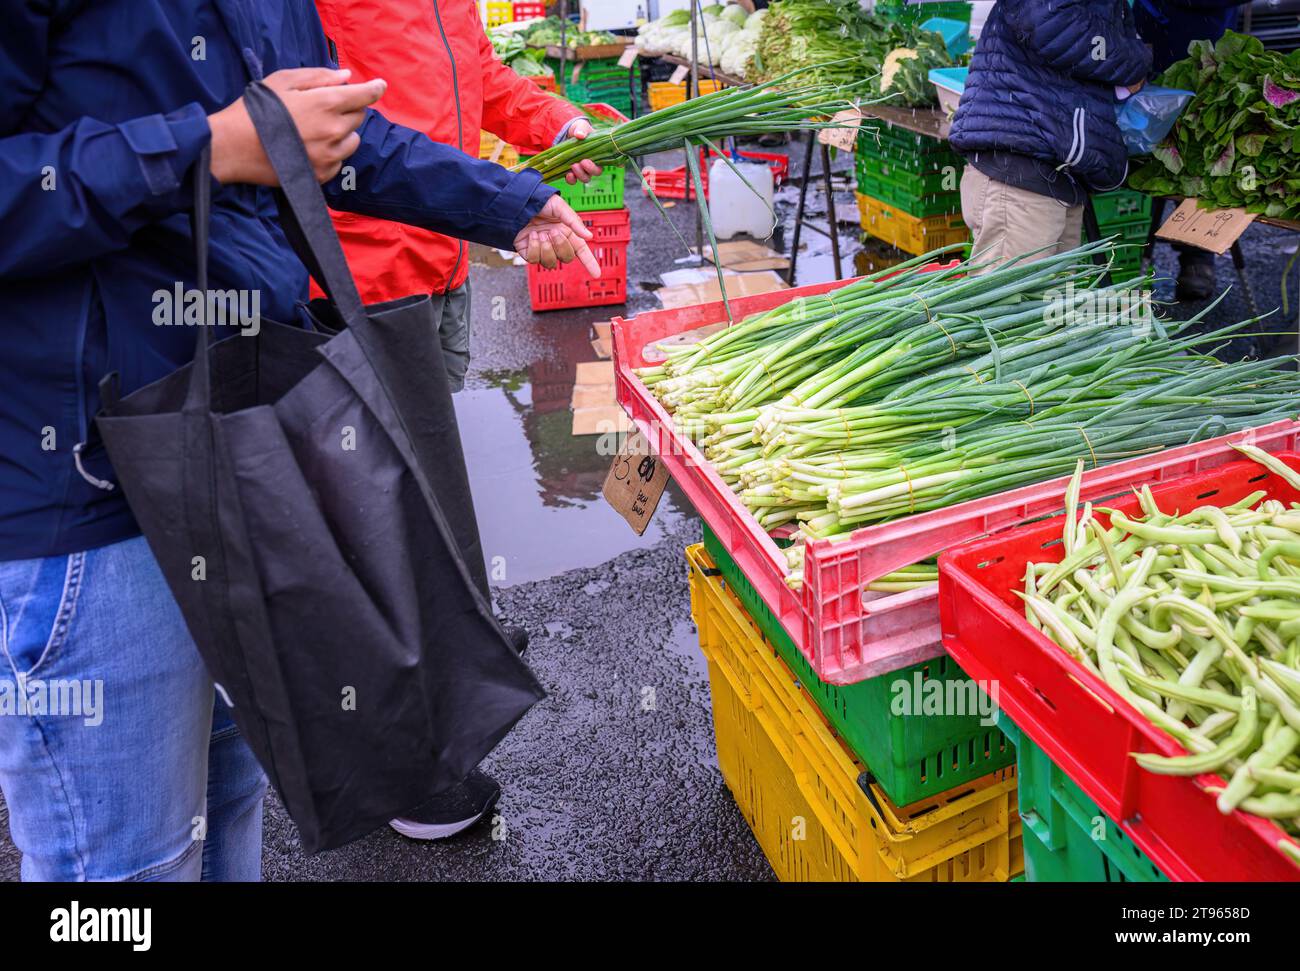 Couple choosing spring onions in the market stalls in the rain. Stock Photo